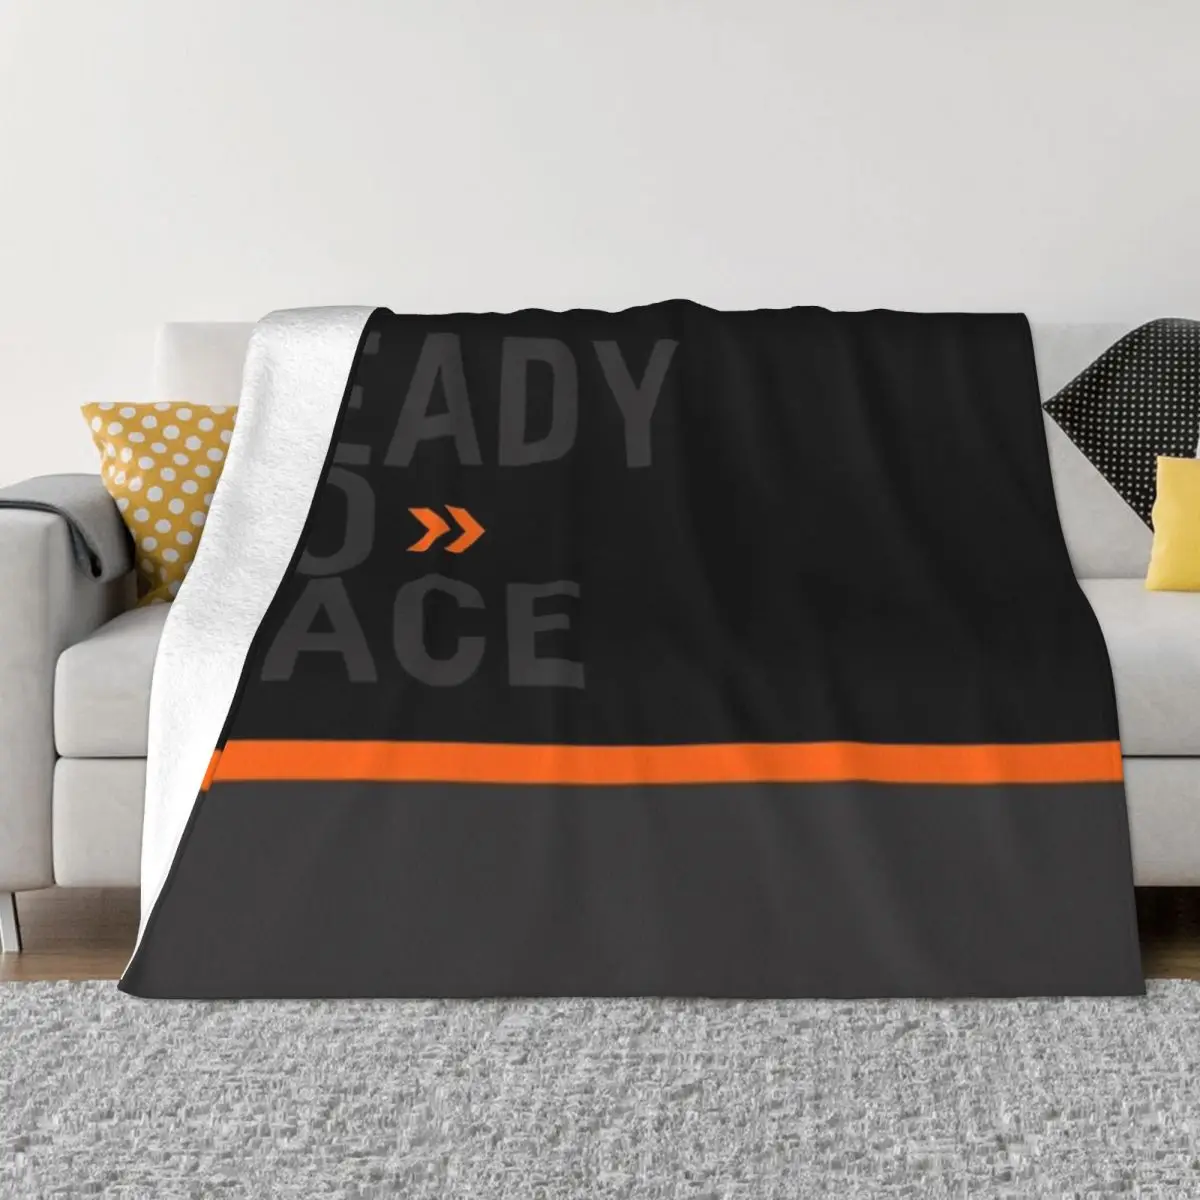 

Ready To Race Enduro Cross Knitted Blanket Flannel Motocross Lightweight Throw Blankets for Home Couch Bed Rug